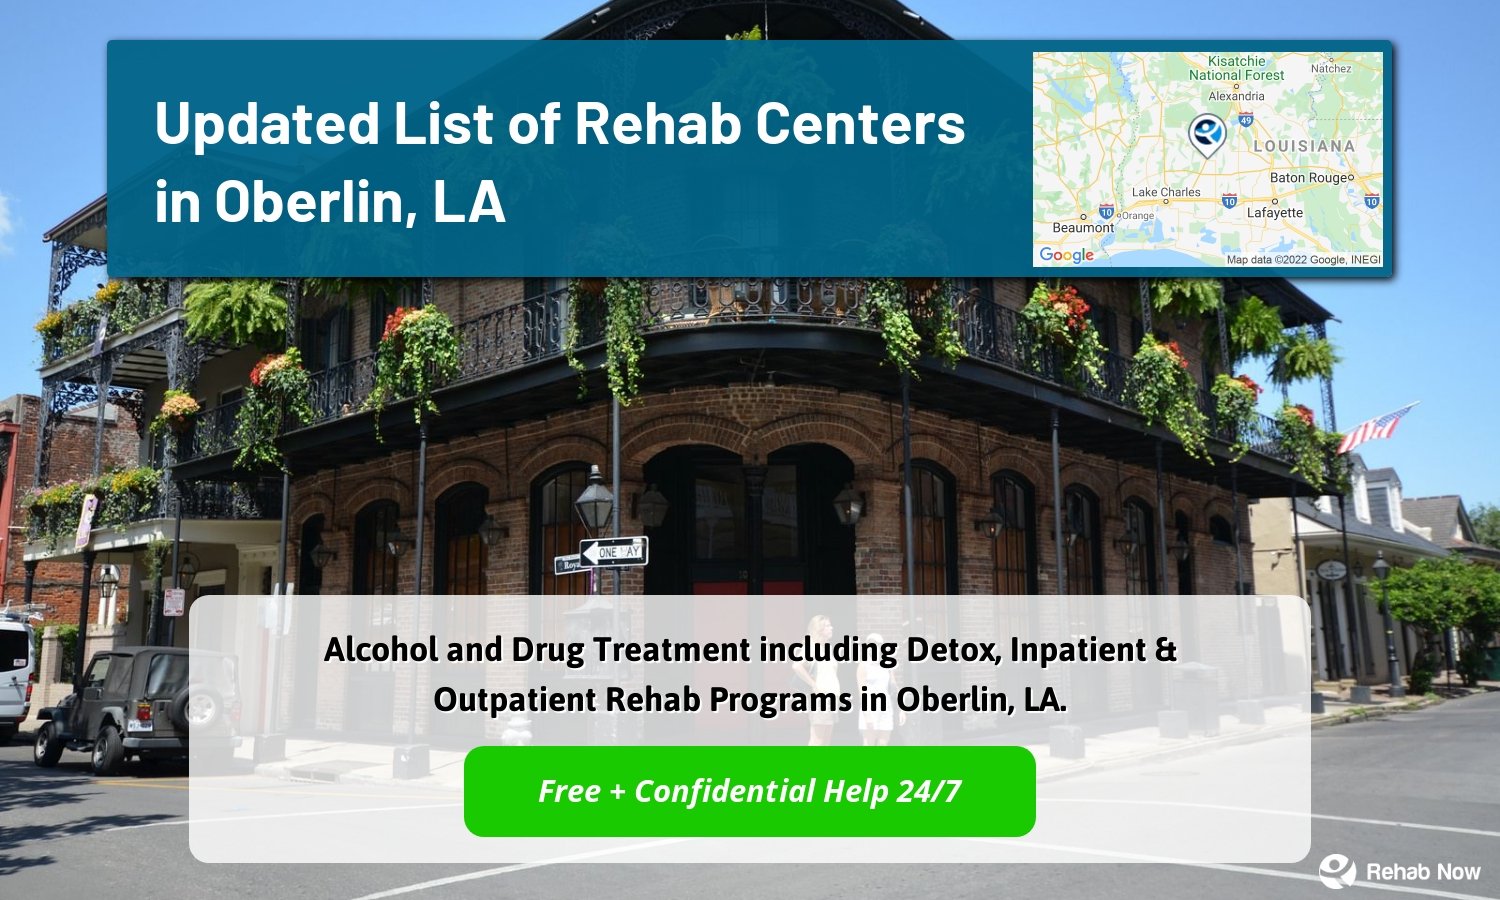 Alcohol and Drug Treatment including Detox, Inpatient & Outpatient Rehab Programs in Oberlin, LA.